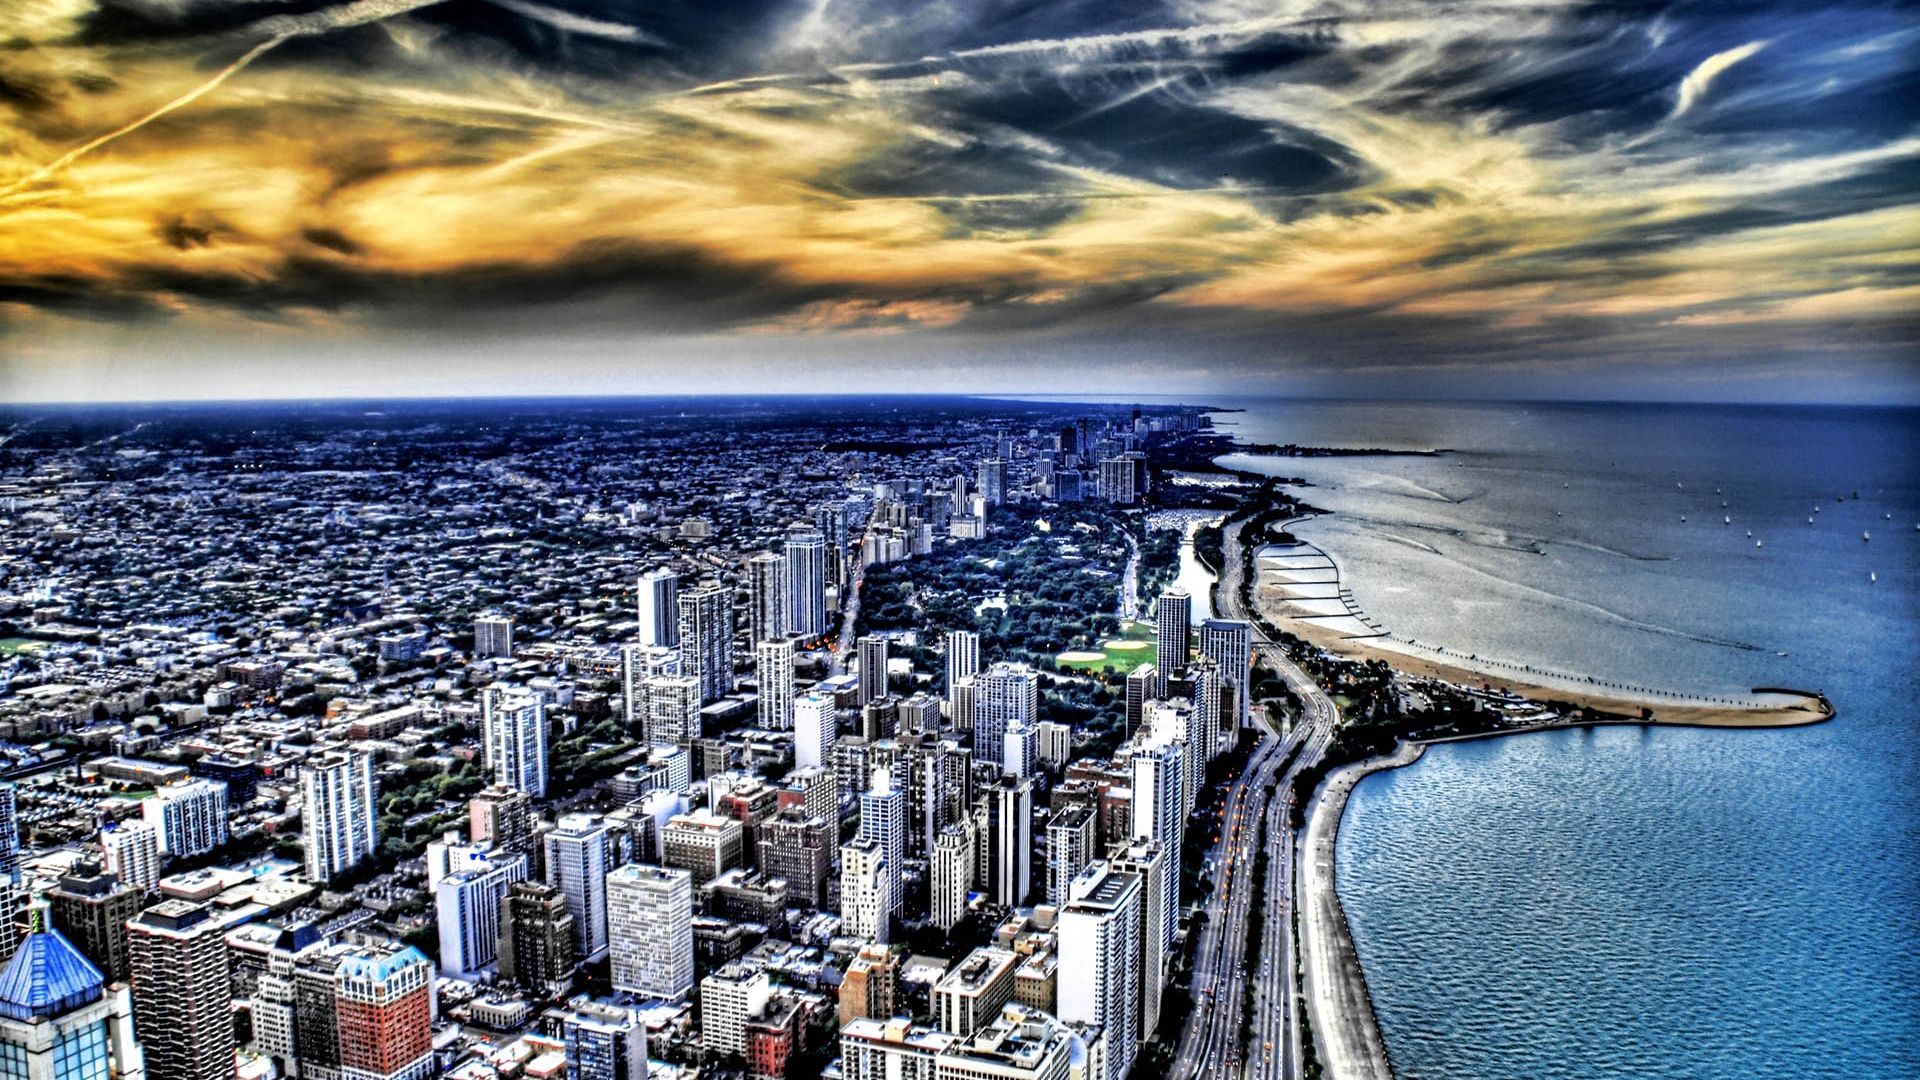 shore, chicago, cities, building, view from above, bank, ocean, skyscrapers, hdr cellphone